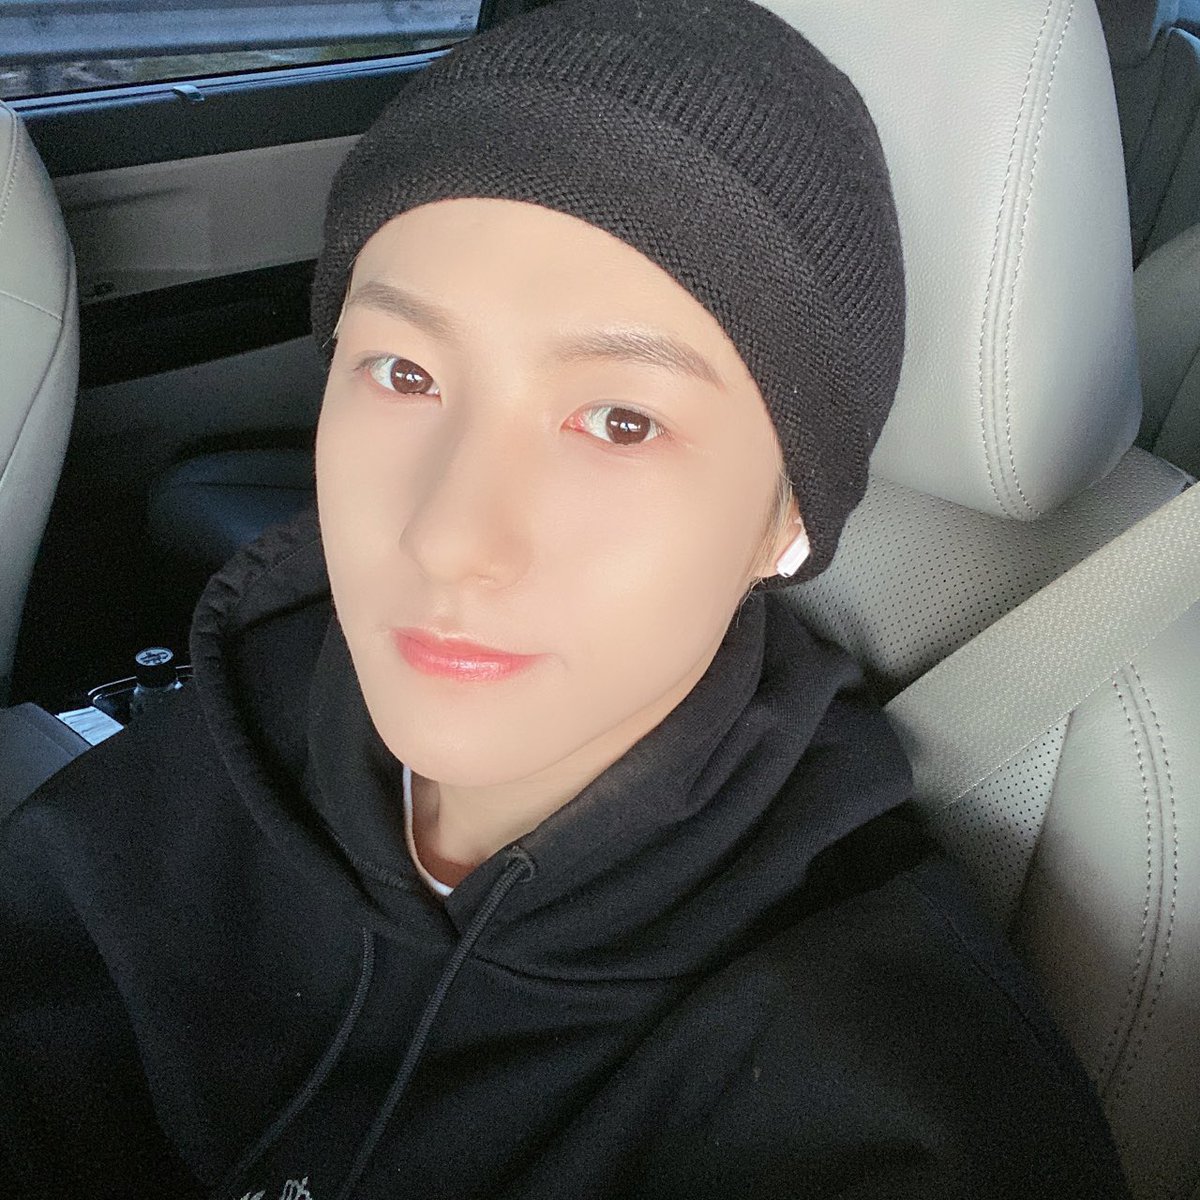 when they was preparing for reload comeback and renjun always wearing his beanie so everyone was thinking he went bald fr